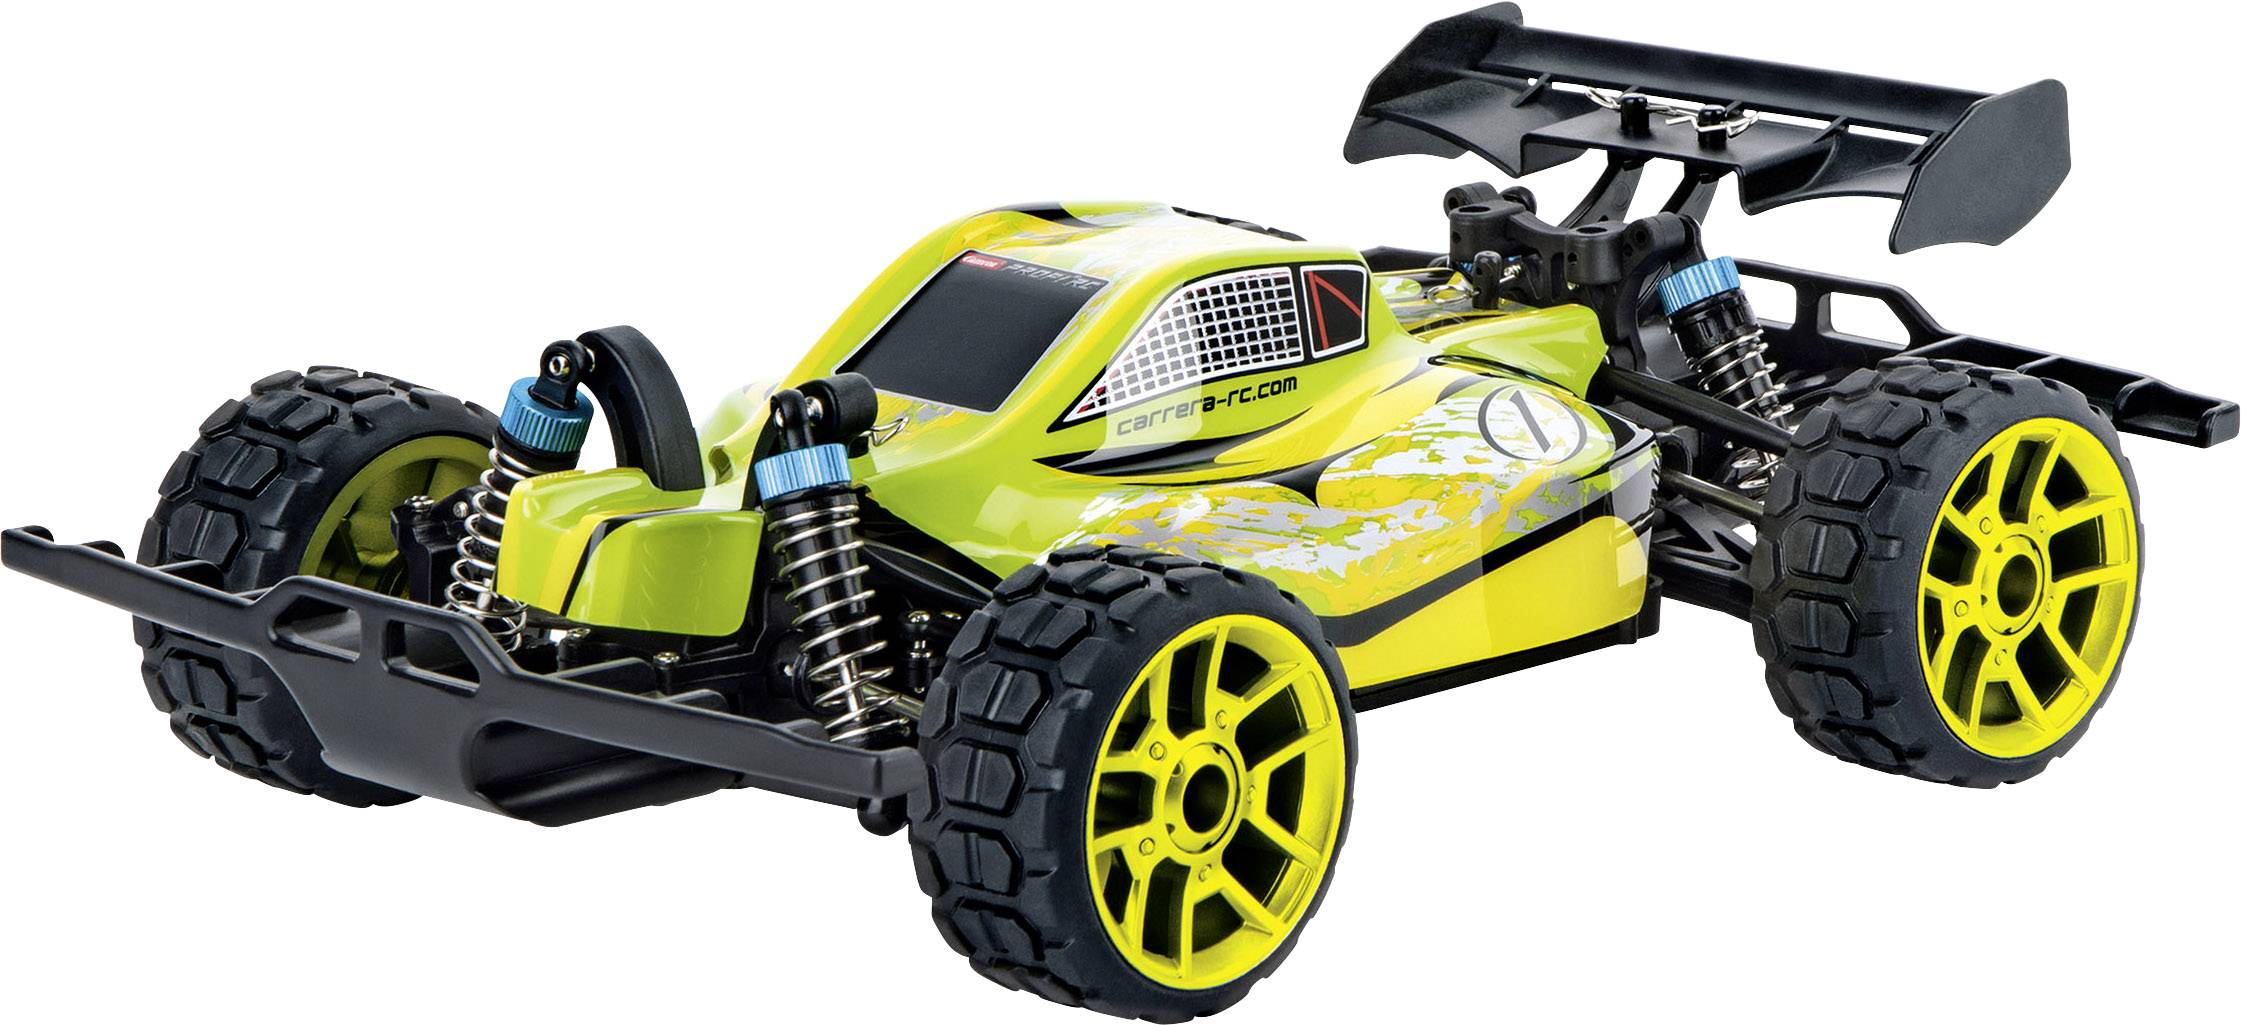 Carrera RC 370183012 Lime Star 1:18 RC model car for beginners Electric  Monster truck 4WD Incl. batteries and charger 